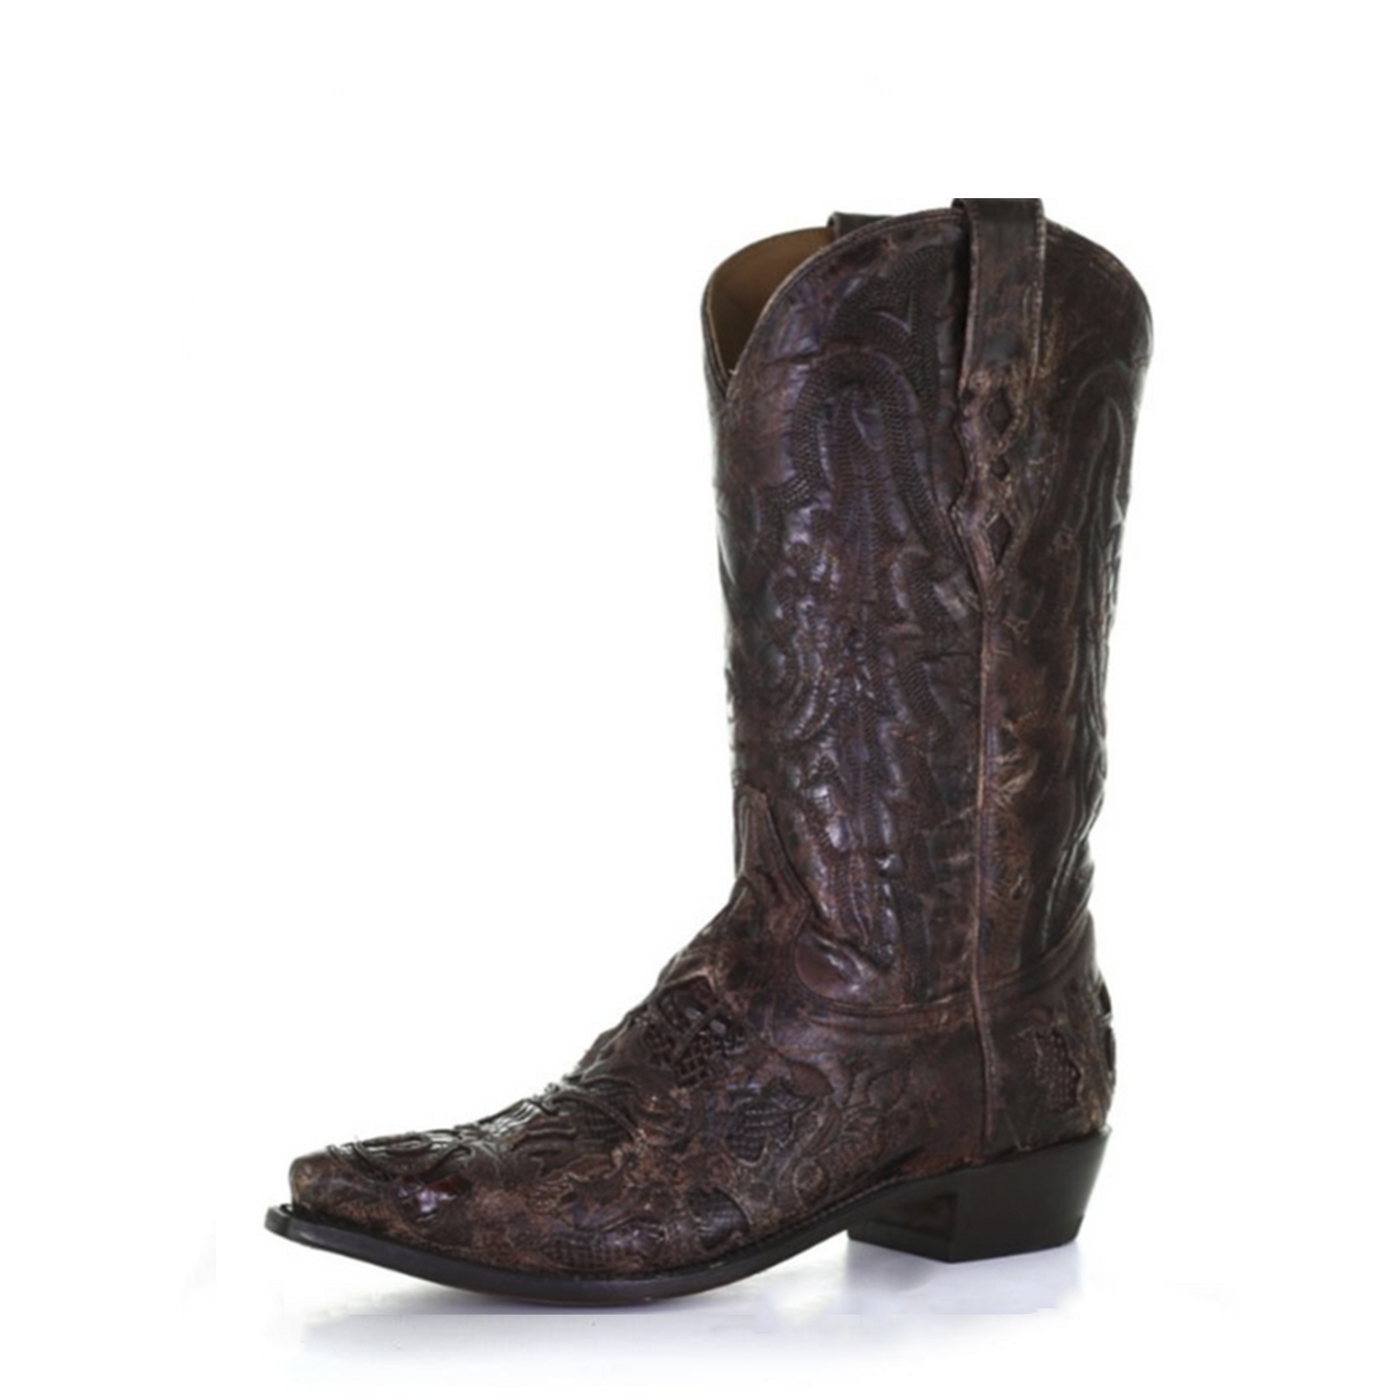 Corral Men's | Alligator Inlay & Embroidery | Snip Toe | Brown